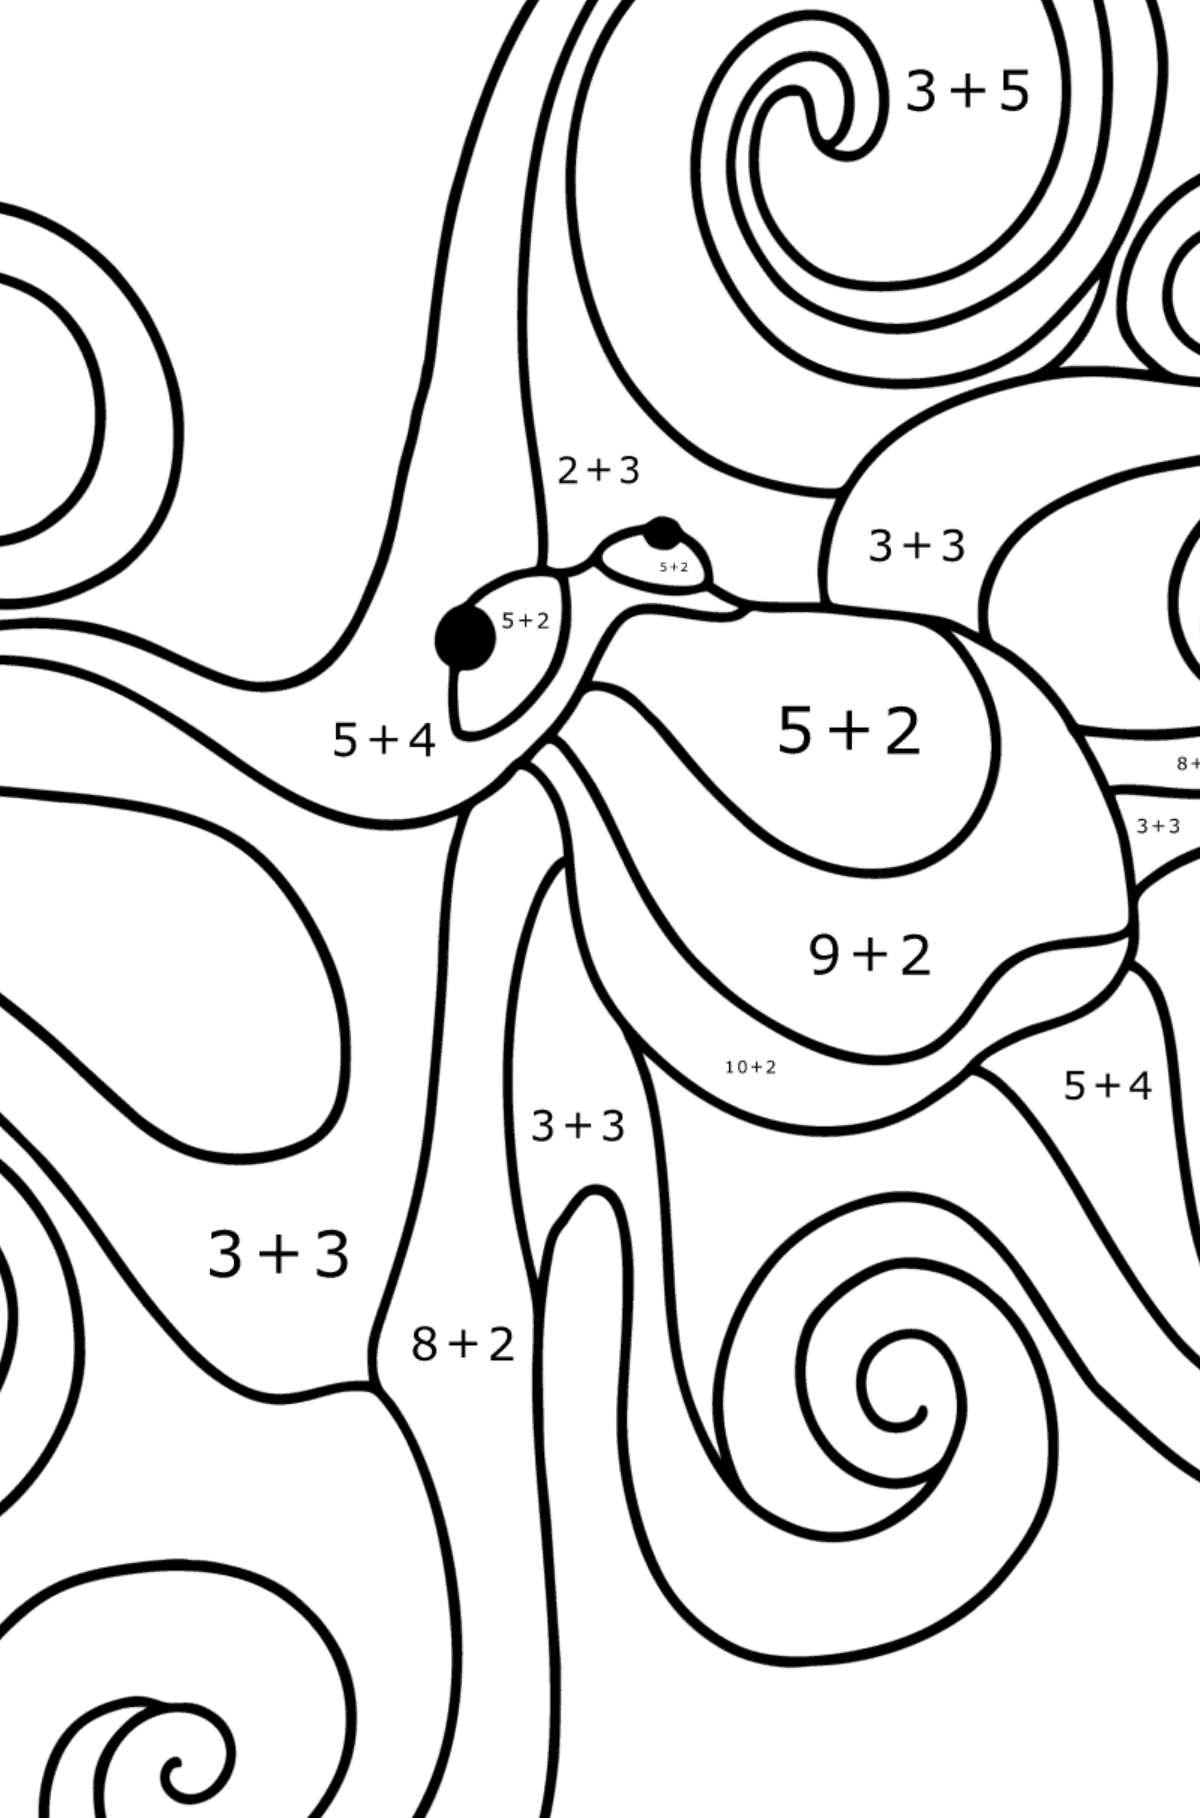 Common octopus coloring page - Math Coloring - Addition for Kids